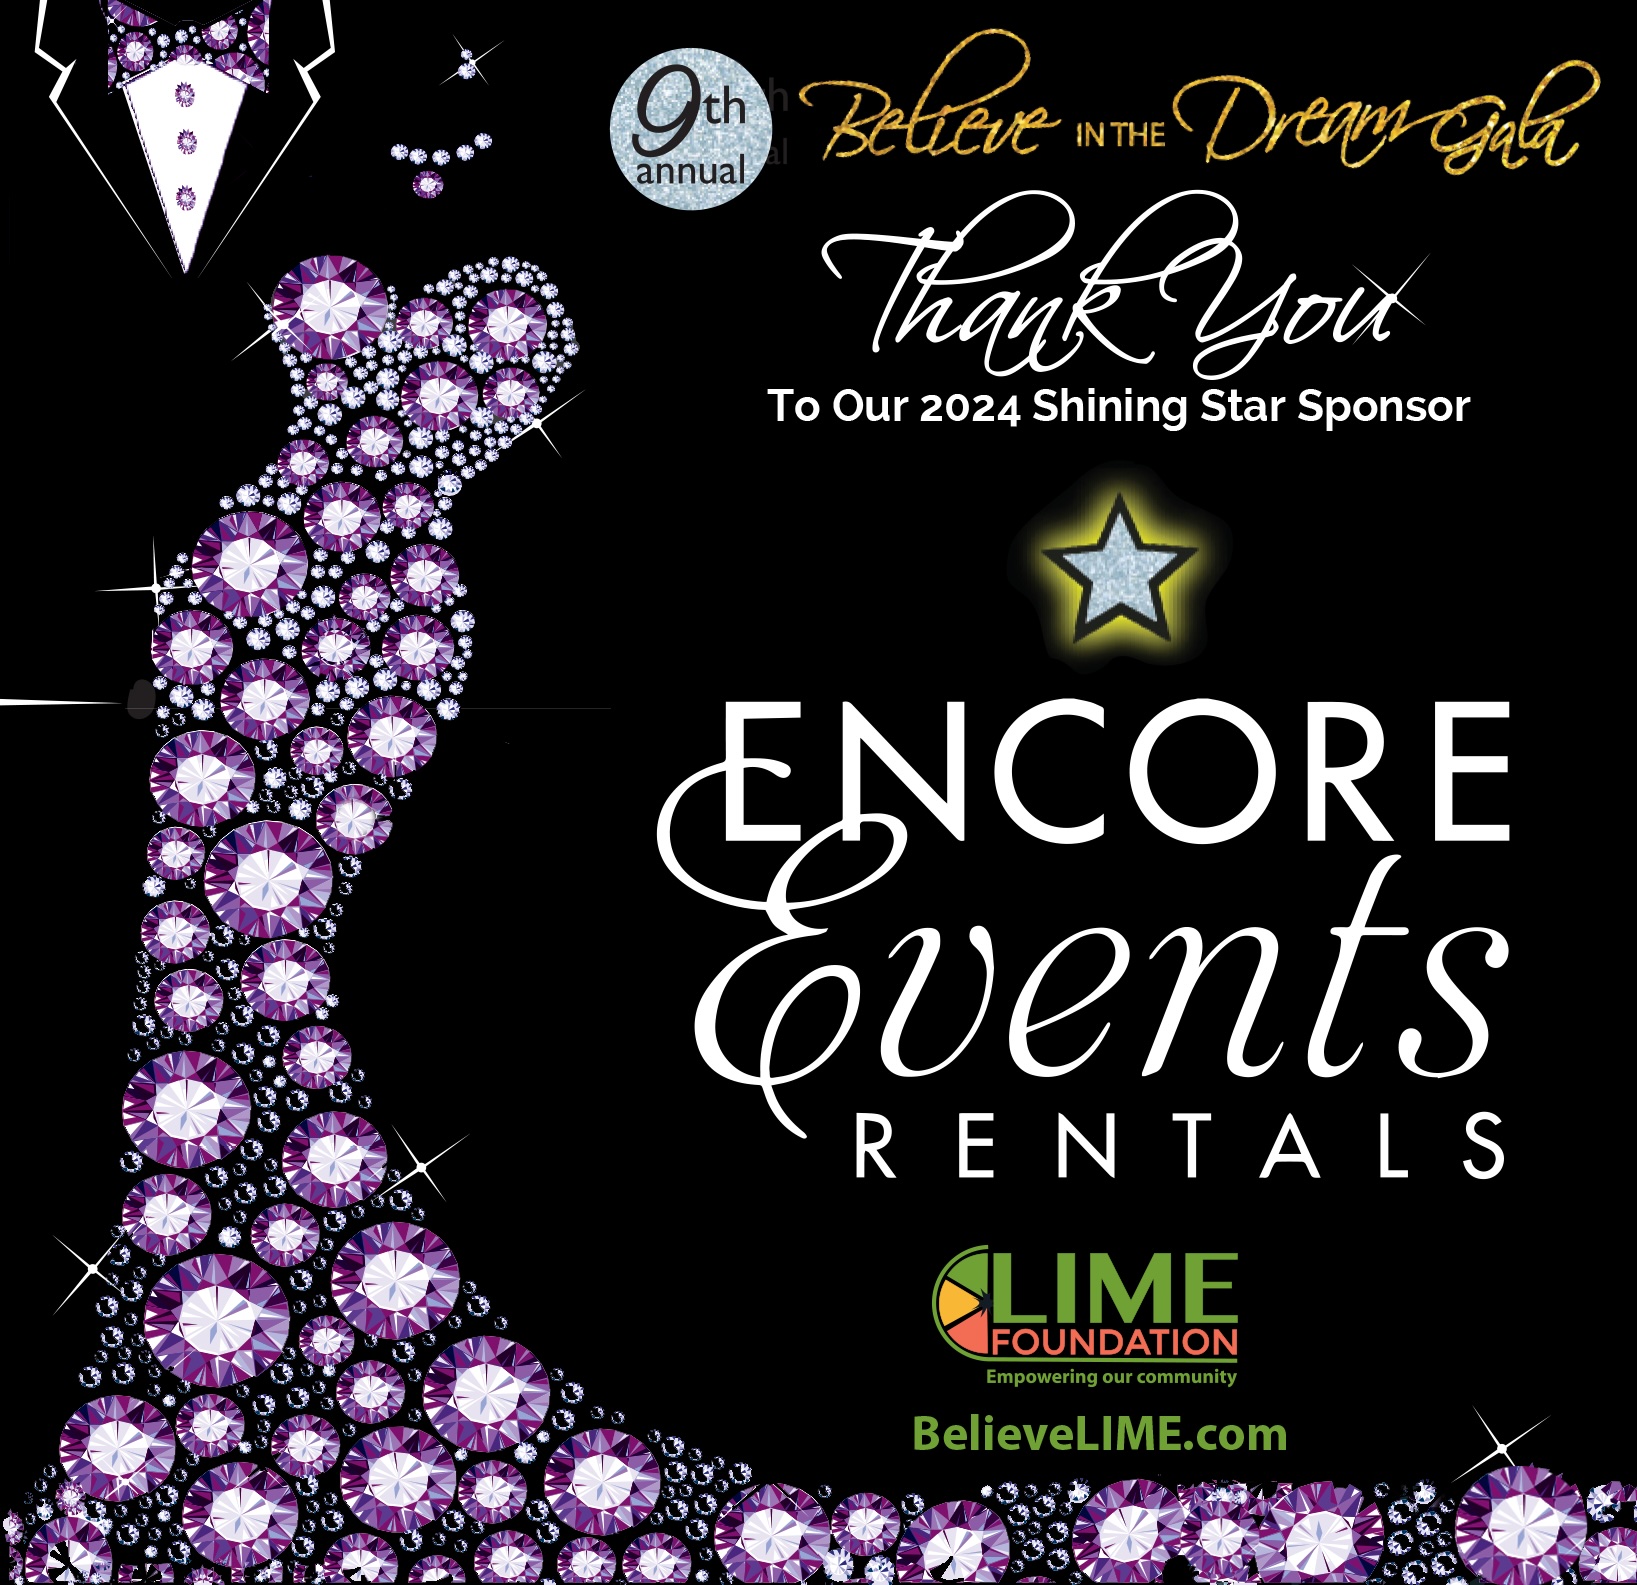 A graphic featuring a glittering high-heeled shoe, thanking sponsors for the Believe in the Dream 2024 gala, with logos for Encore Events Rentals and Lime Foundation.